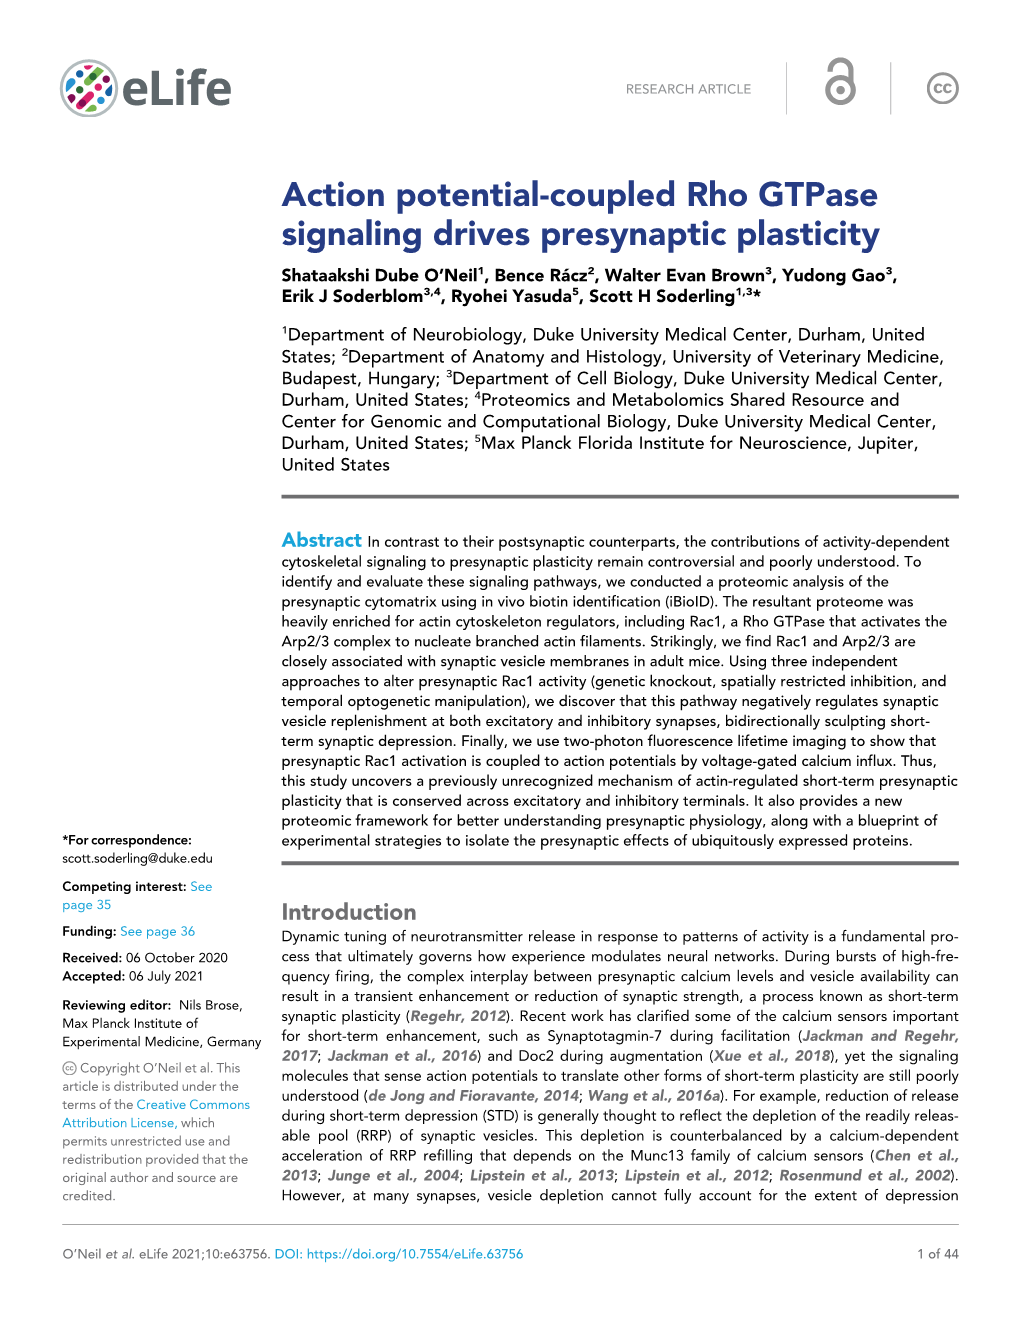 Action Potential-Coupled Rho Gtpase Signaling Drives Presynaptic Plasticity